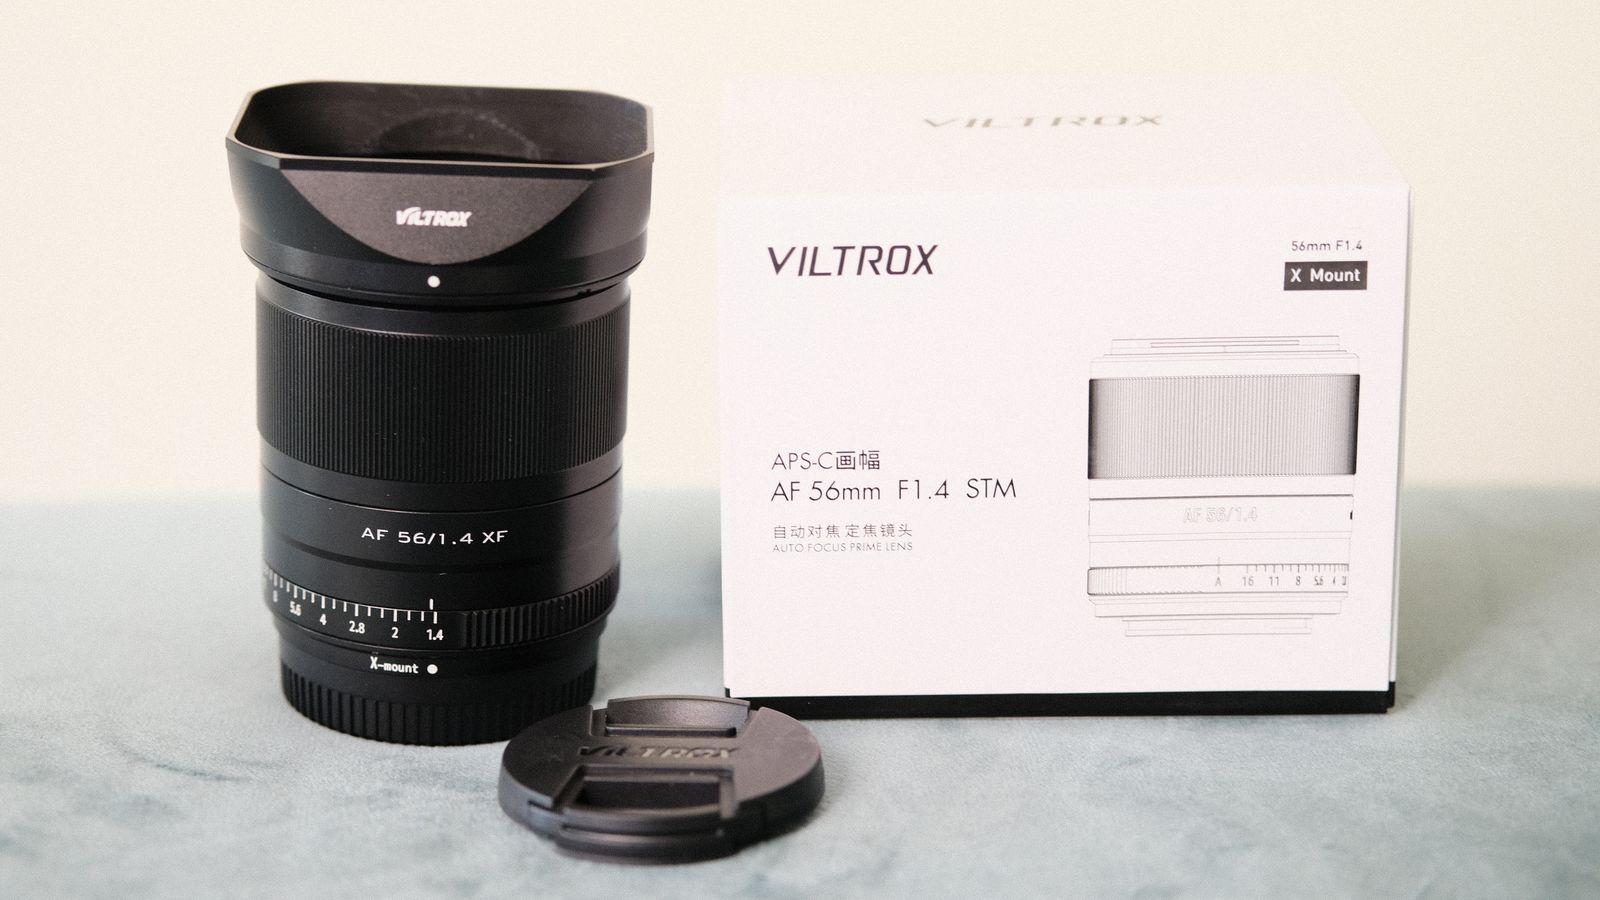 Viltrox AF 56mm f/1.4 XF Lens for FUJIFILM X (Black) From Studious One Film  Arts On Gear...